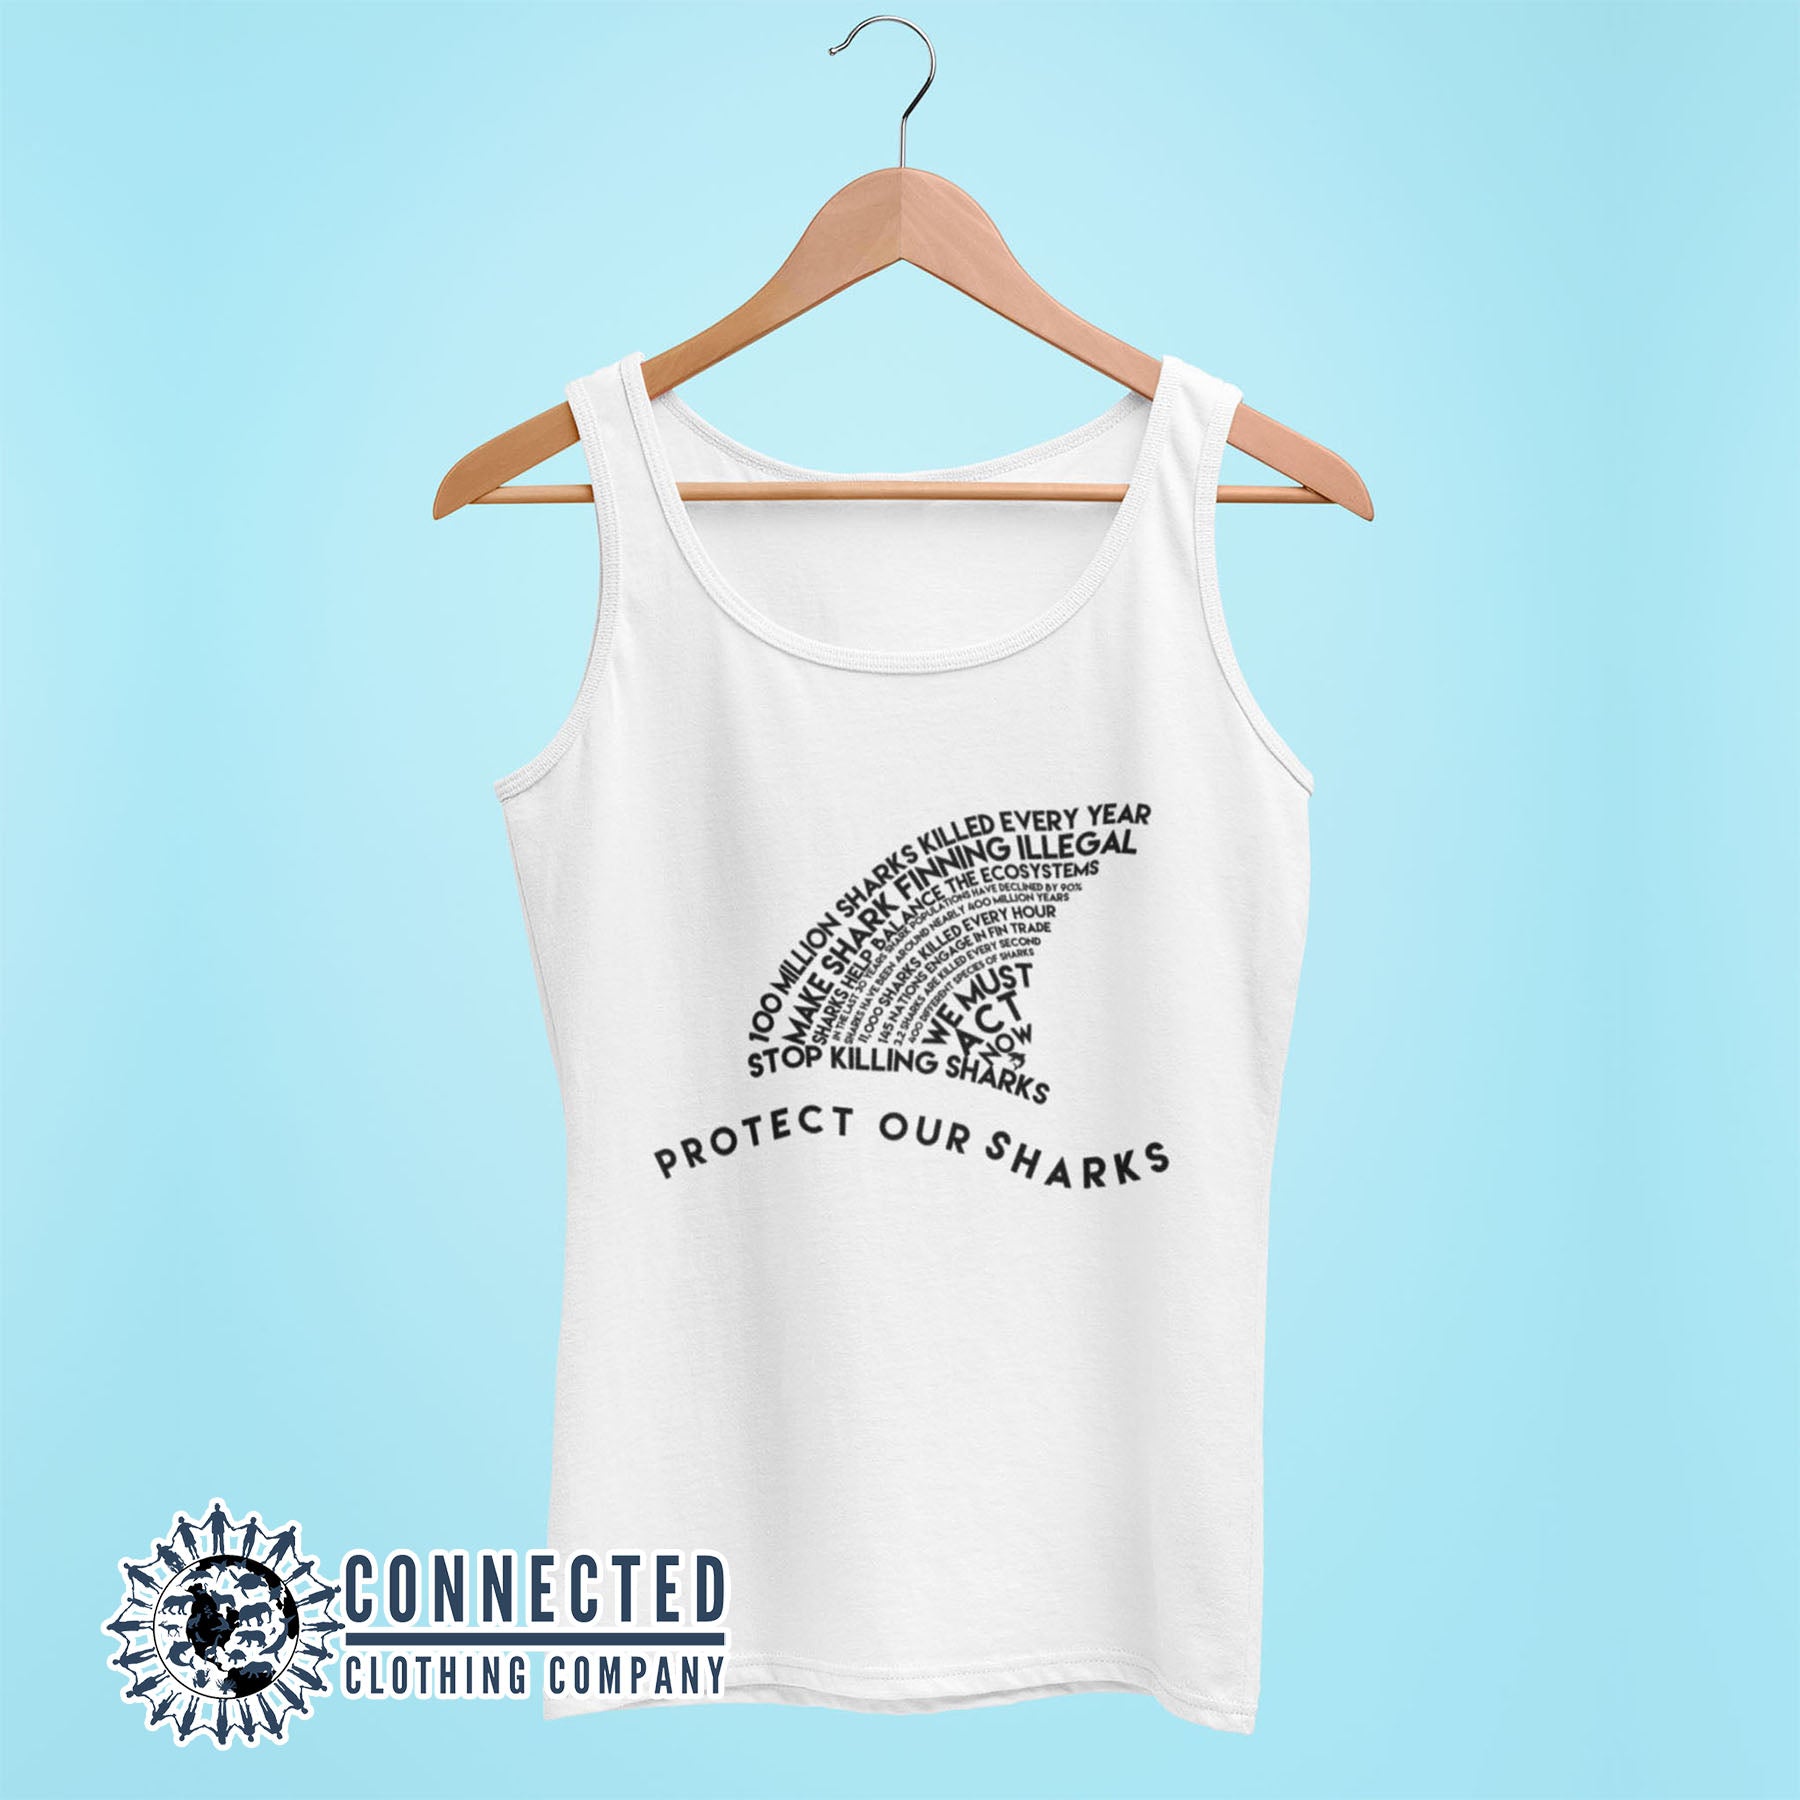 White Protect Our Sharks Women's Relaxed Tank Top - Connected Clothing Company - Ethically and Sustainably Made - 10% of profits donated to Oceana shark conservation